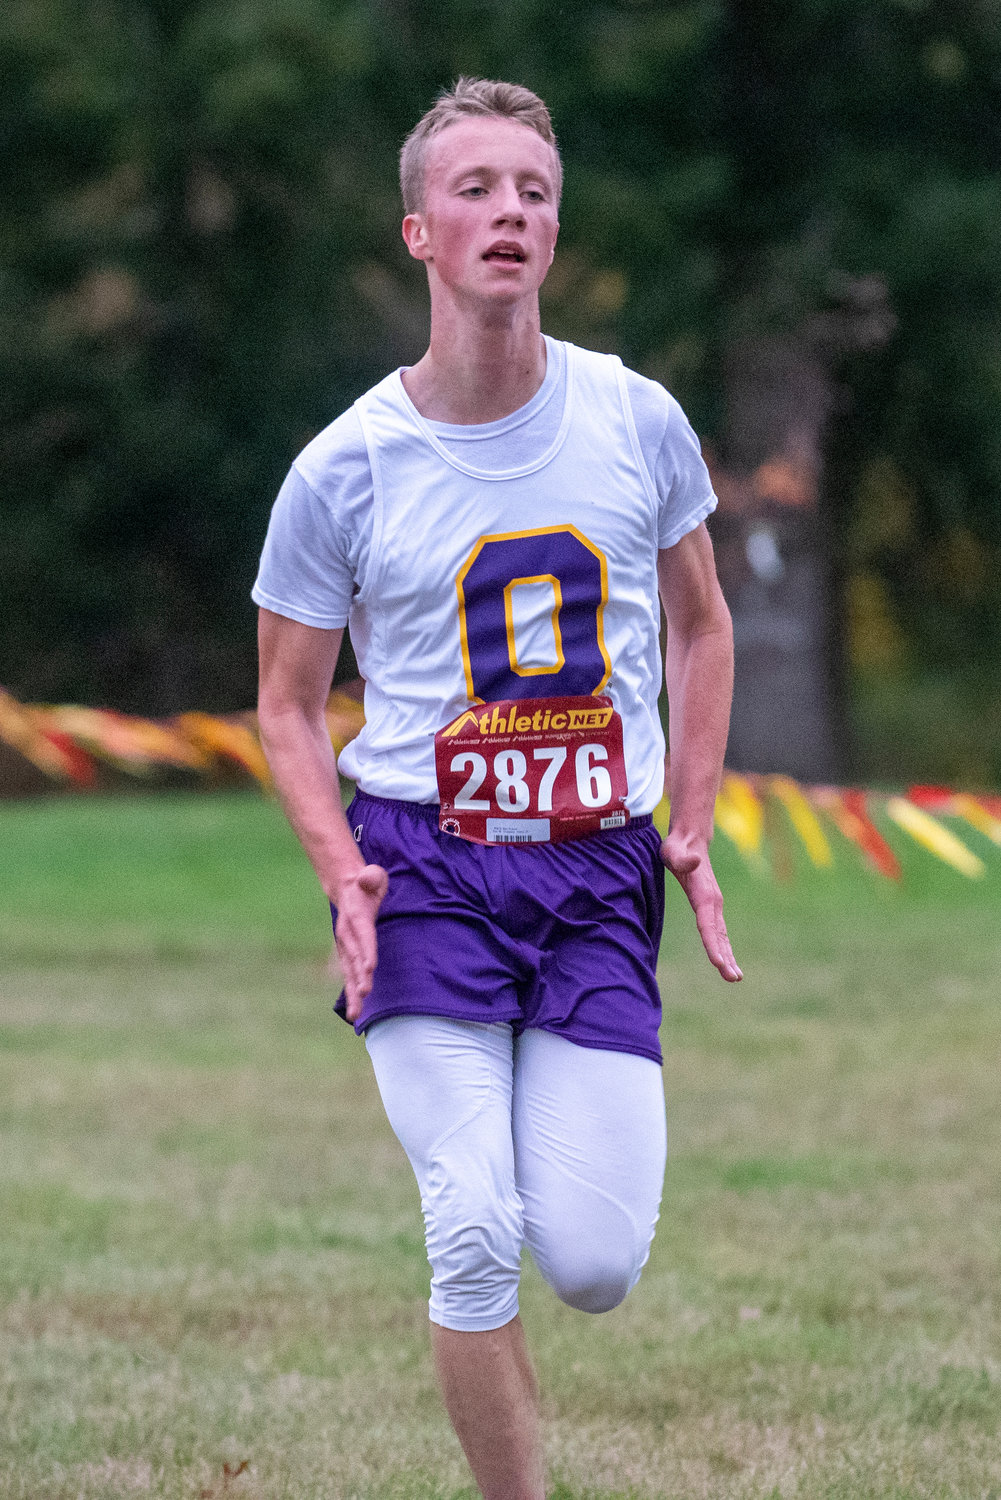 Onalaska senior Lethon Fitch approaches the finish line of the 2B Central League cross country championships on Oct. 21, 2021.